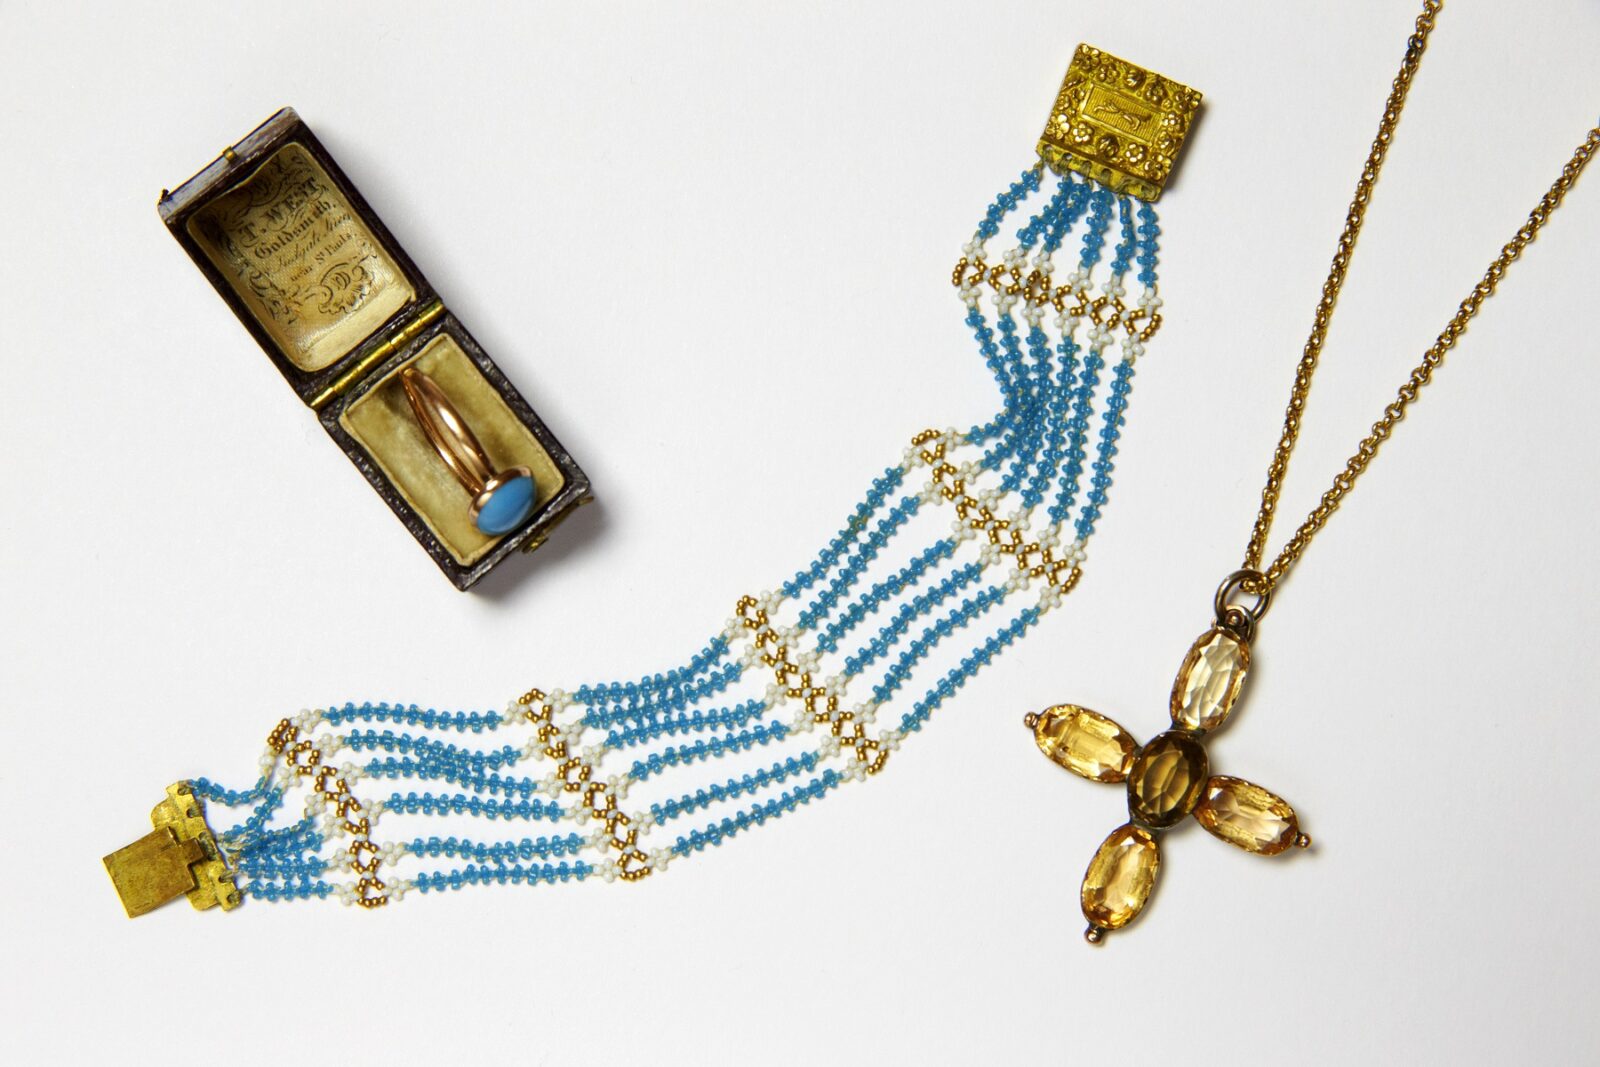 Jane Austen's ring, turquoise bead bracelet and topaz cross on a gold chain, from the collection at Jane Austen's House